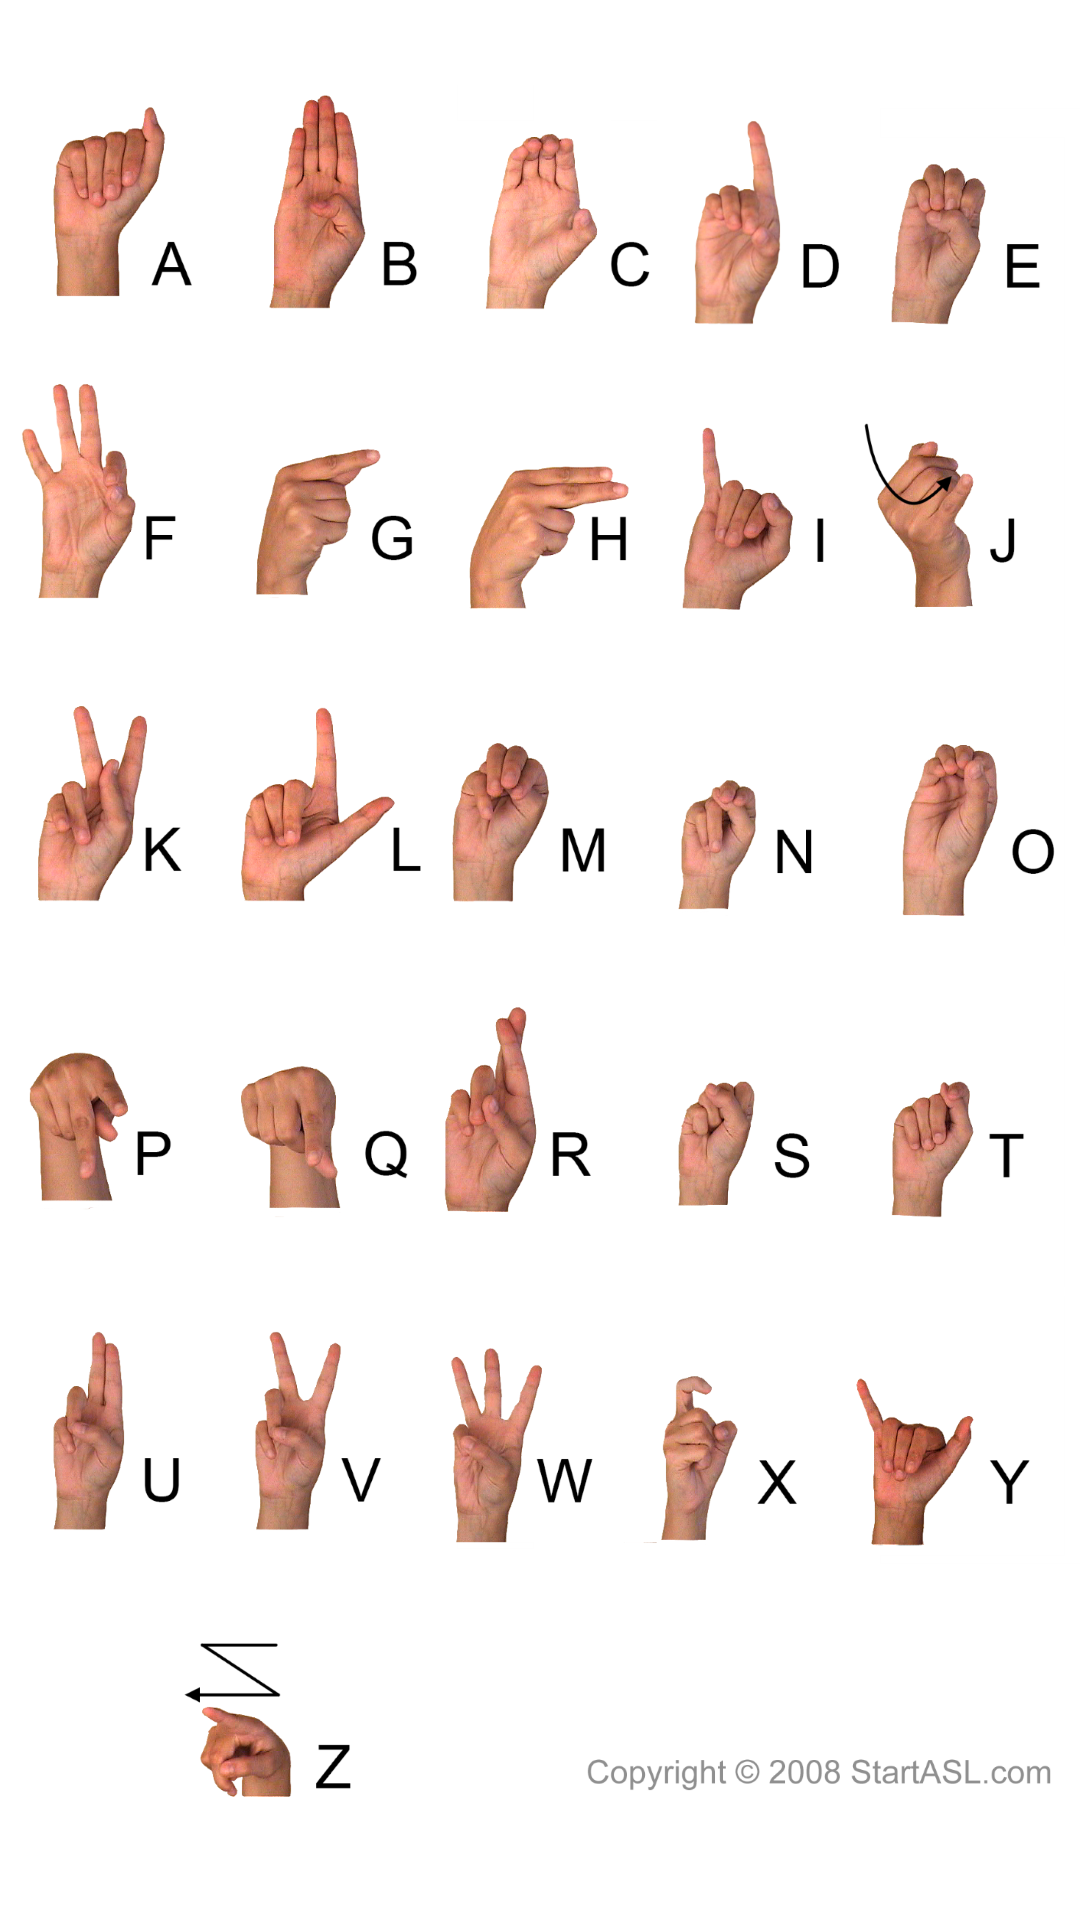 Sign Language Alphabet Free Downloads to Learn it Fast